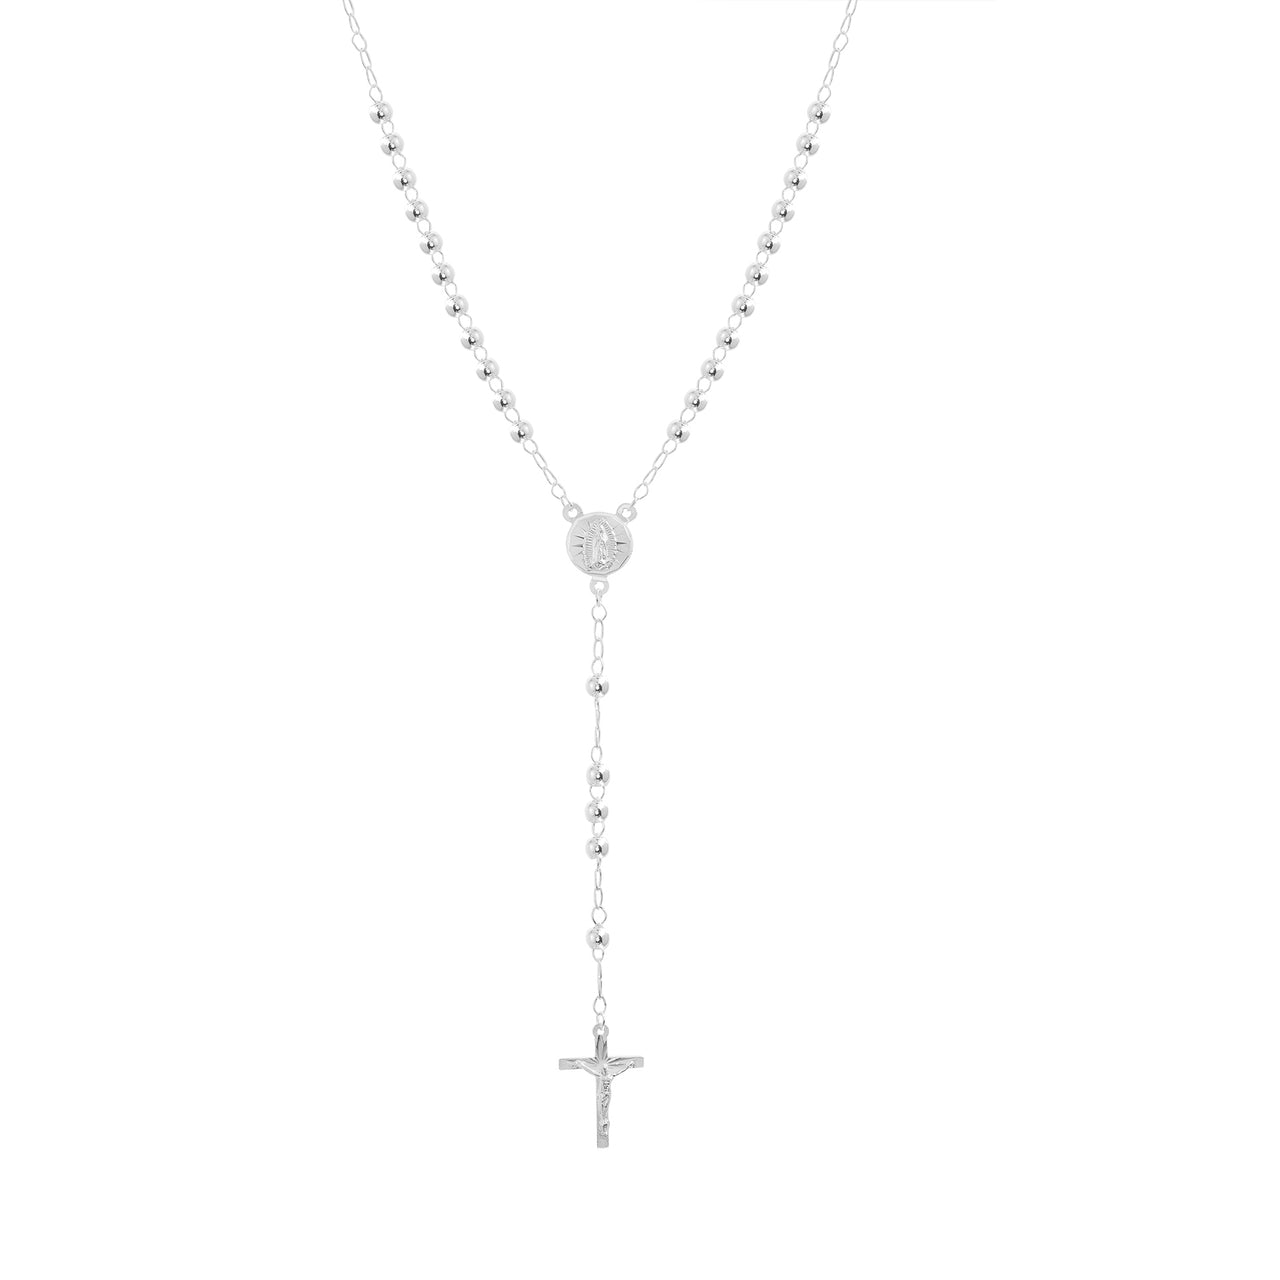 Sterling Silver Polished Beads Crucifix Rosary Necklace with 4mm Beads